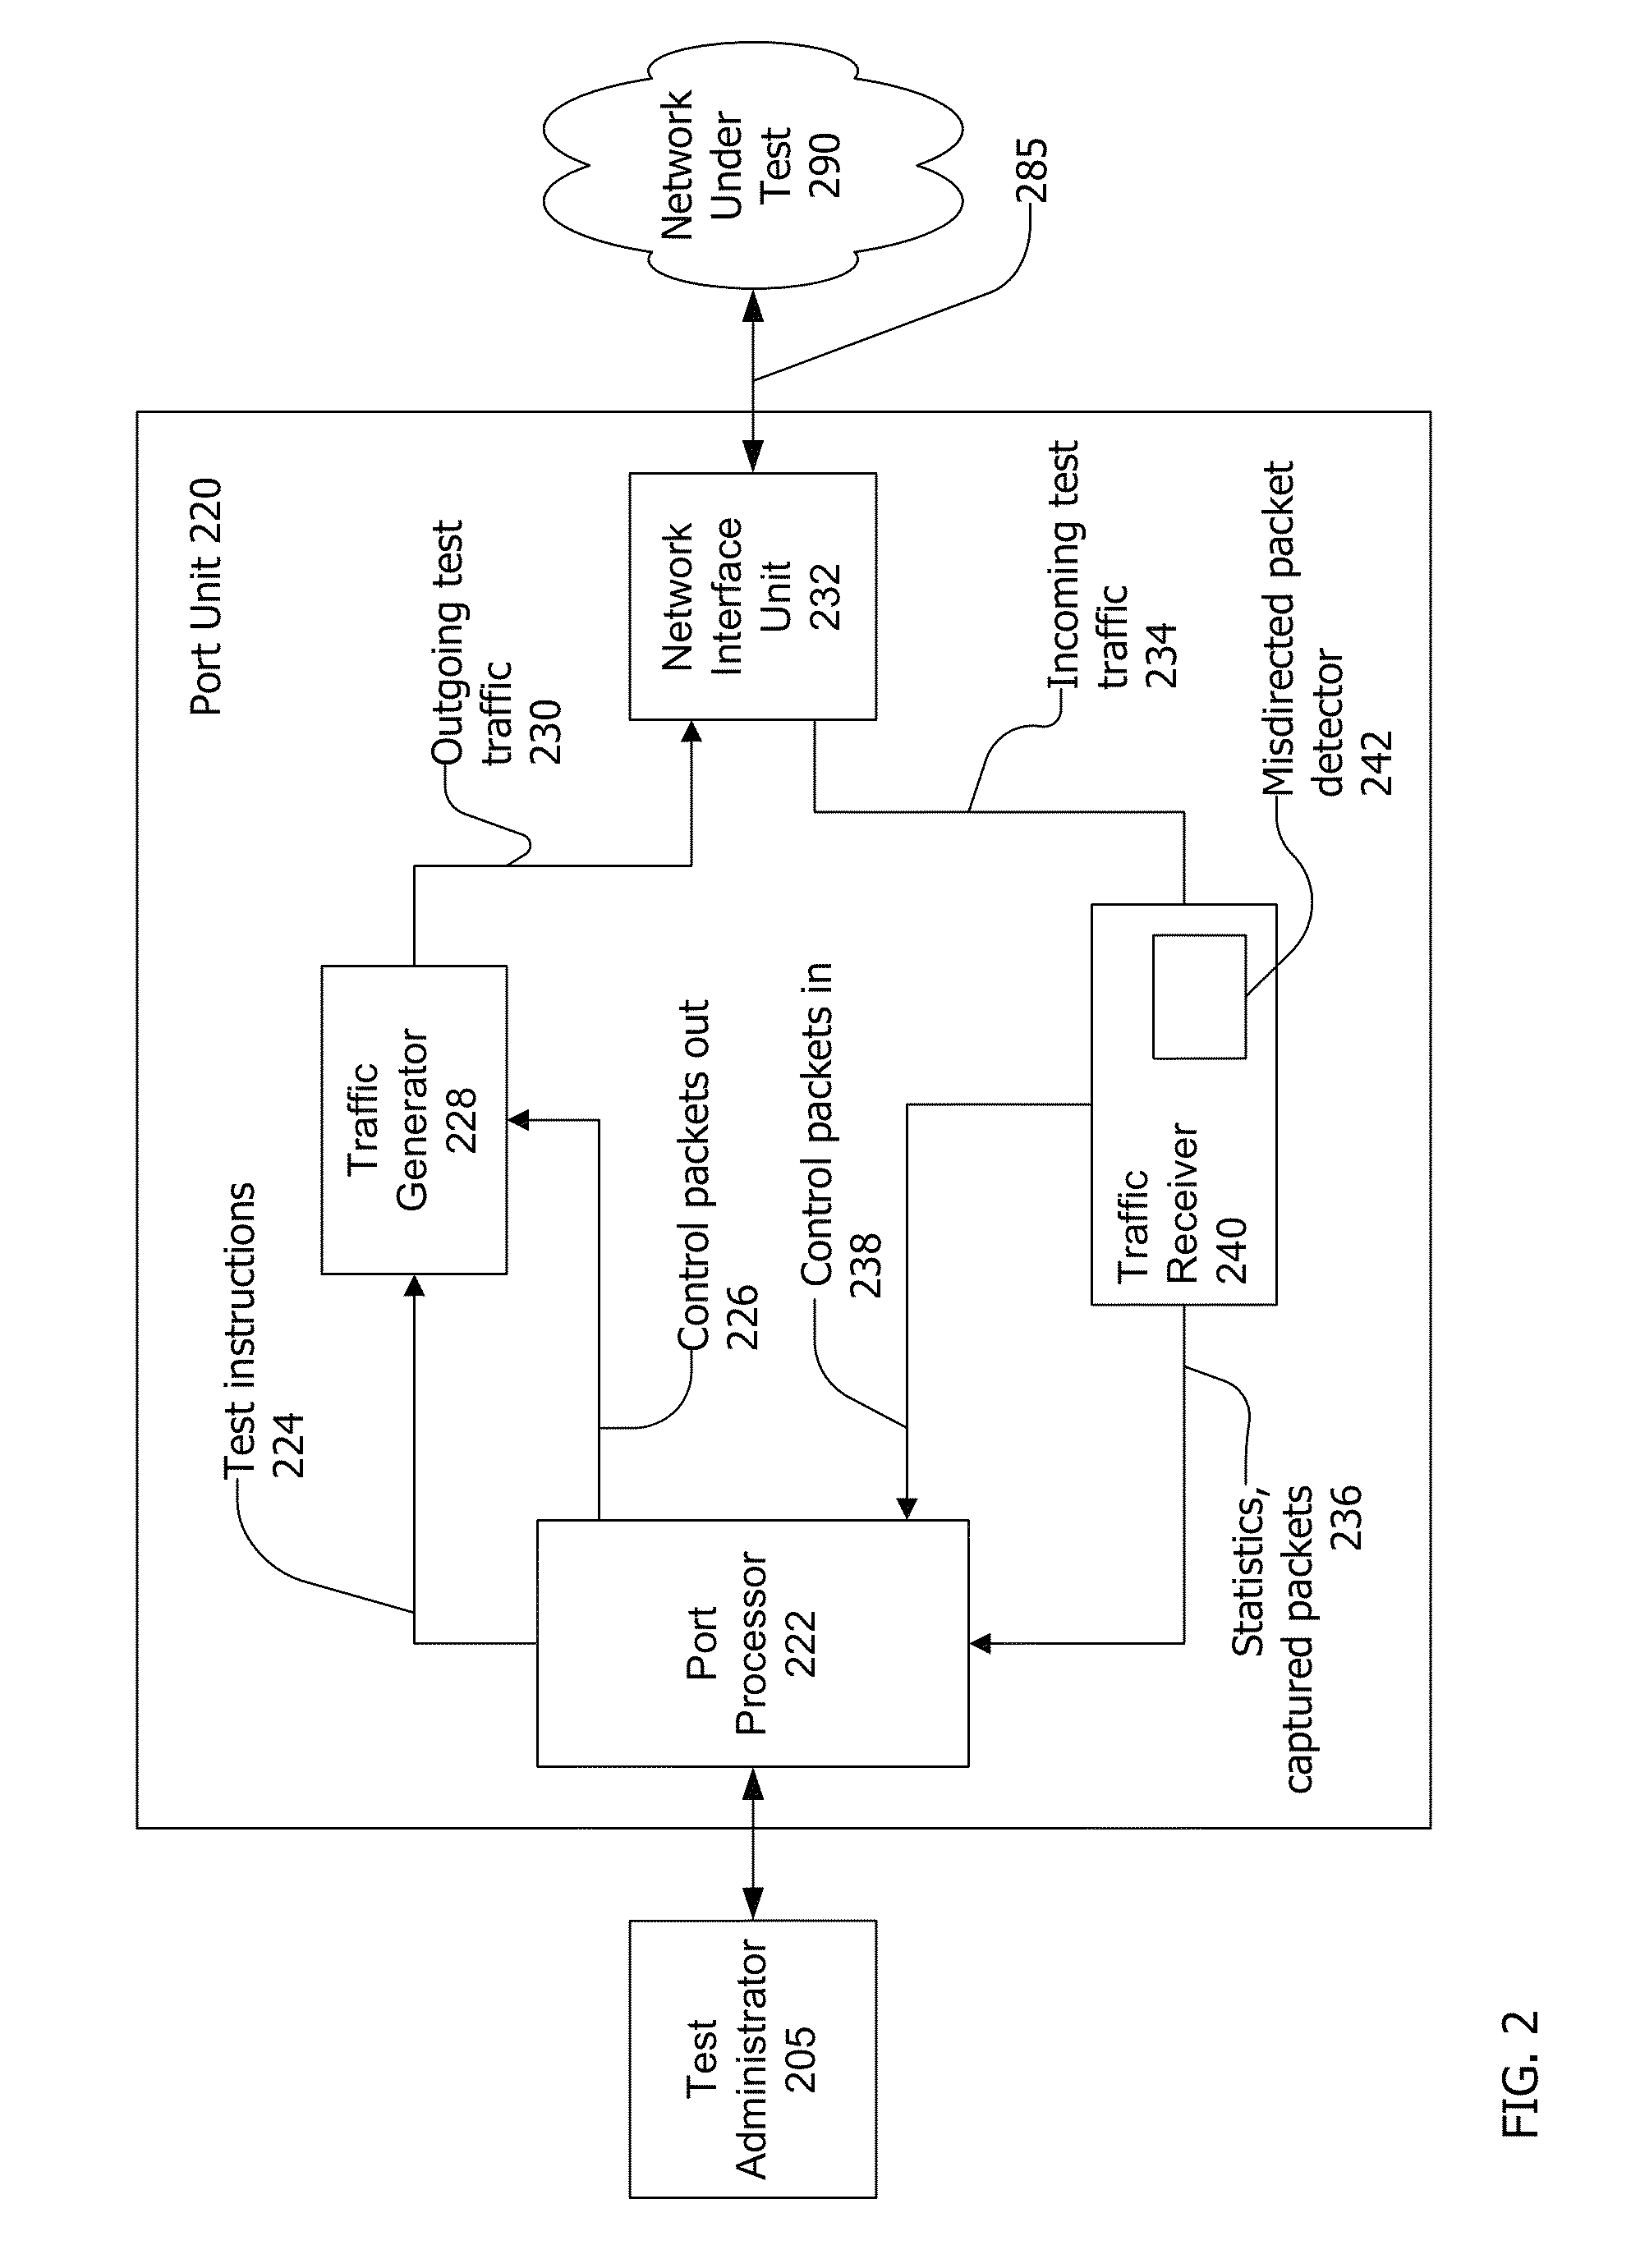 Misdirected packet detection apparatus and method